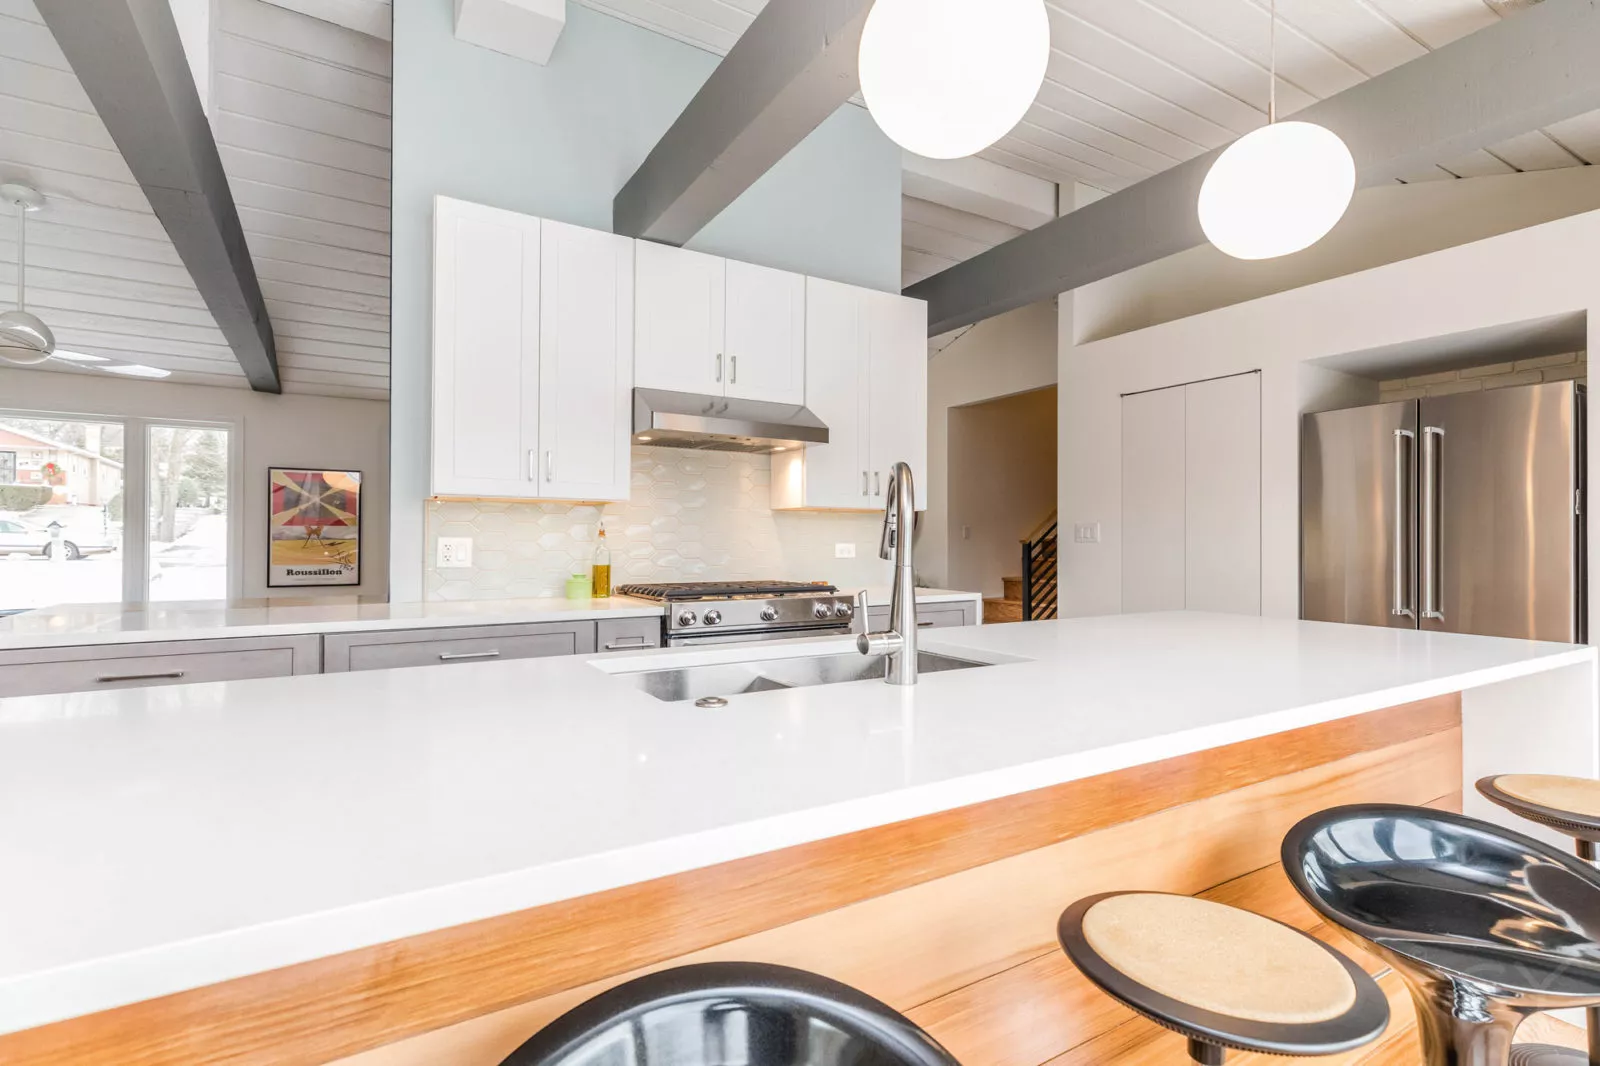 white cabinets & countertops stainless steel appliances grey ceiling beams & large white island